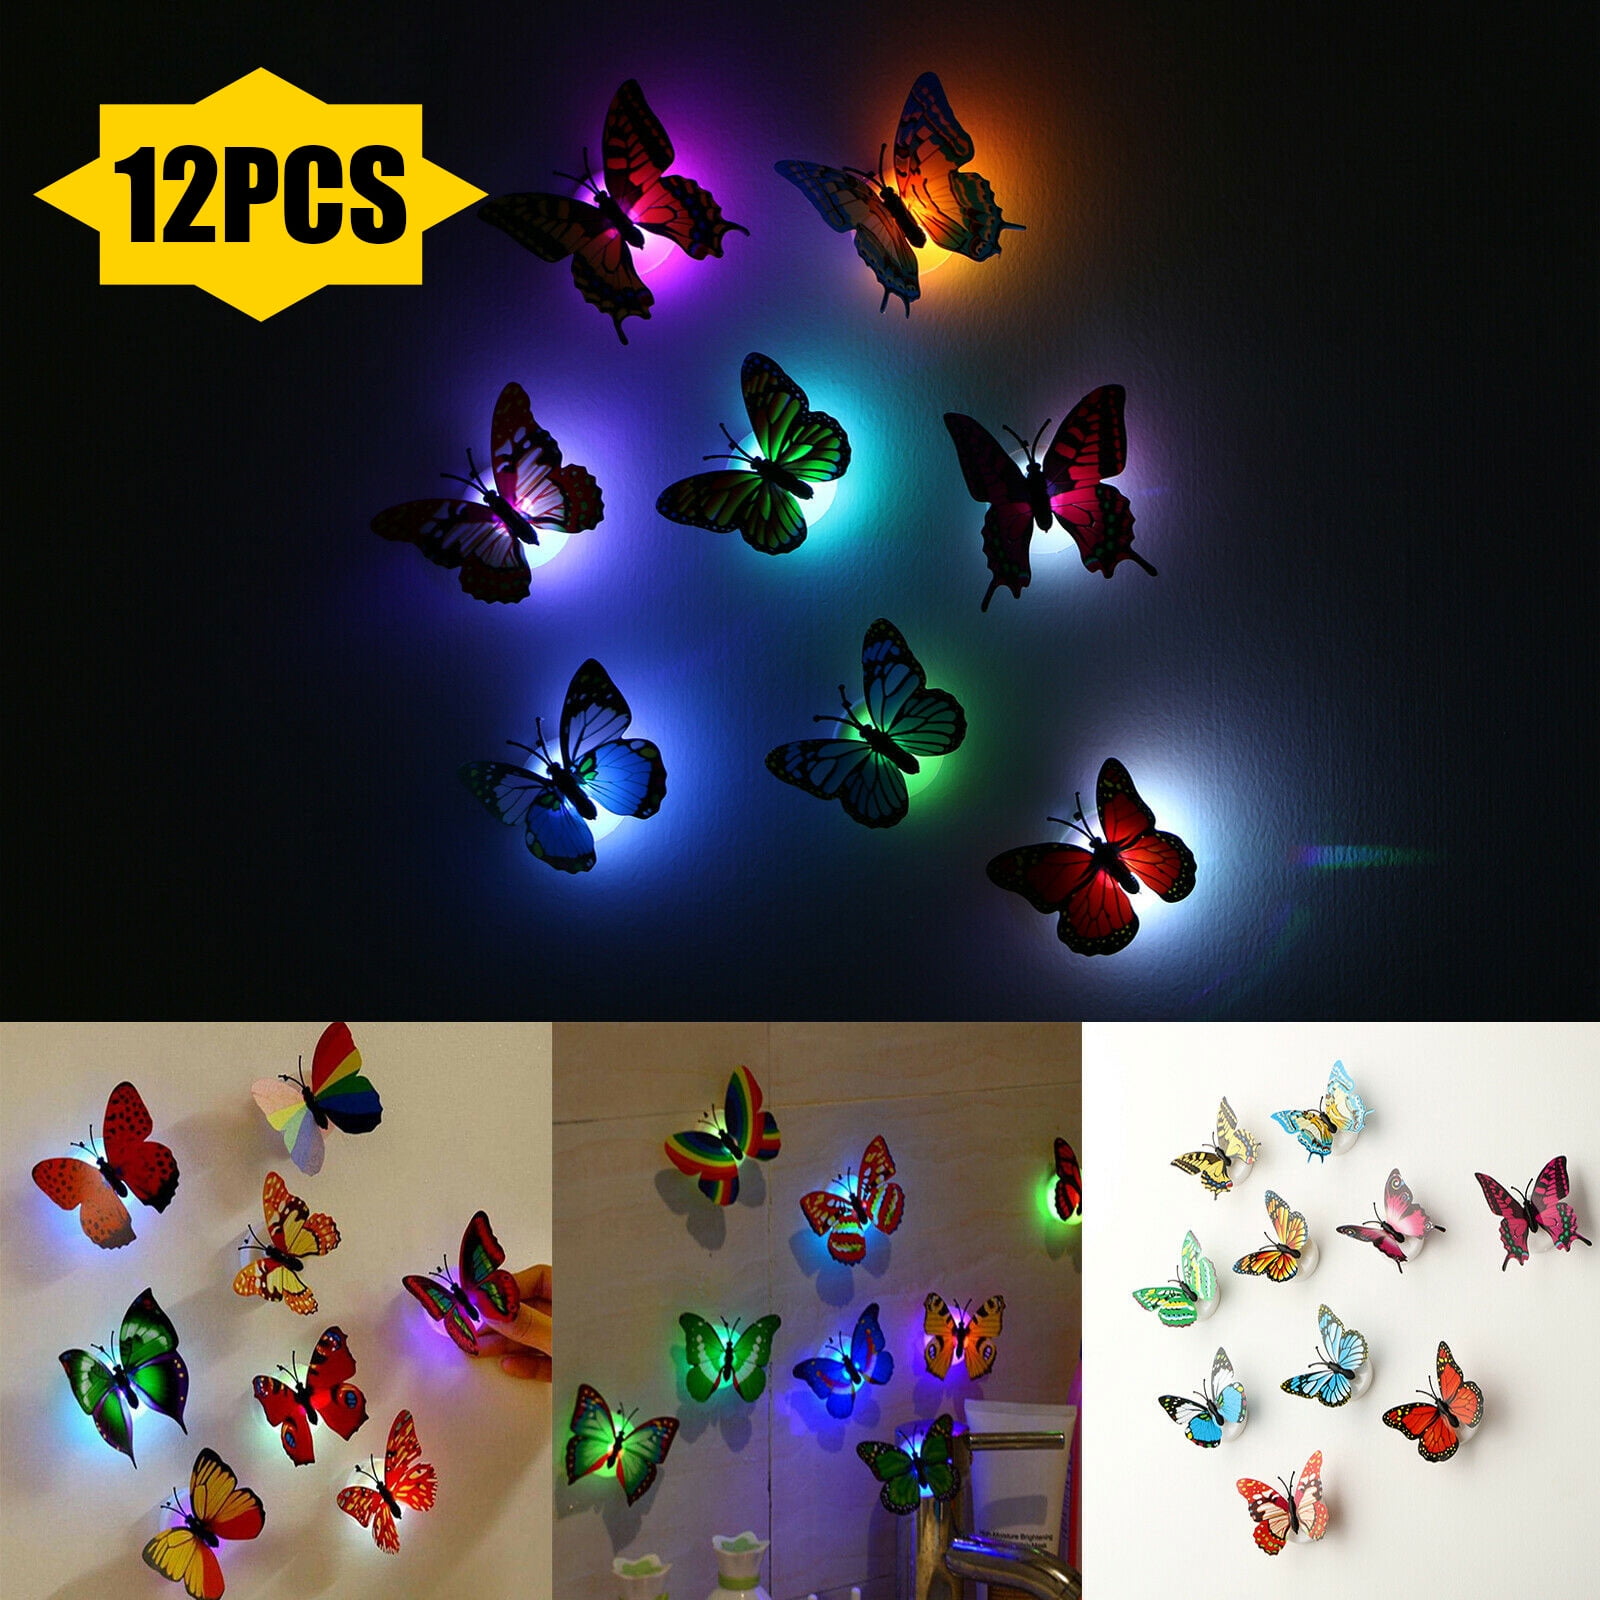 Beautiful 3D Butterfly Wall Decals Removable with Magnets DIY Home Decorations Art Decor Wall Stickers & Murals for Babys Bedroom TV Background Living Room Wall Art Home Decor  72 pcs in 6 Colors